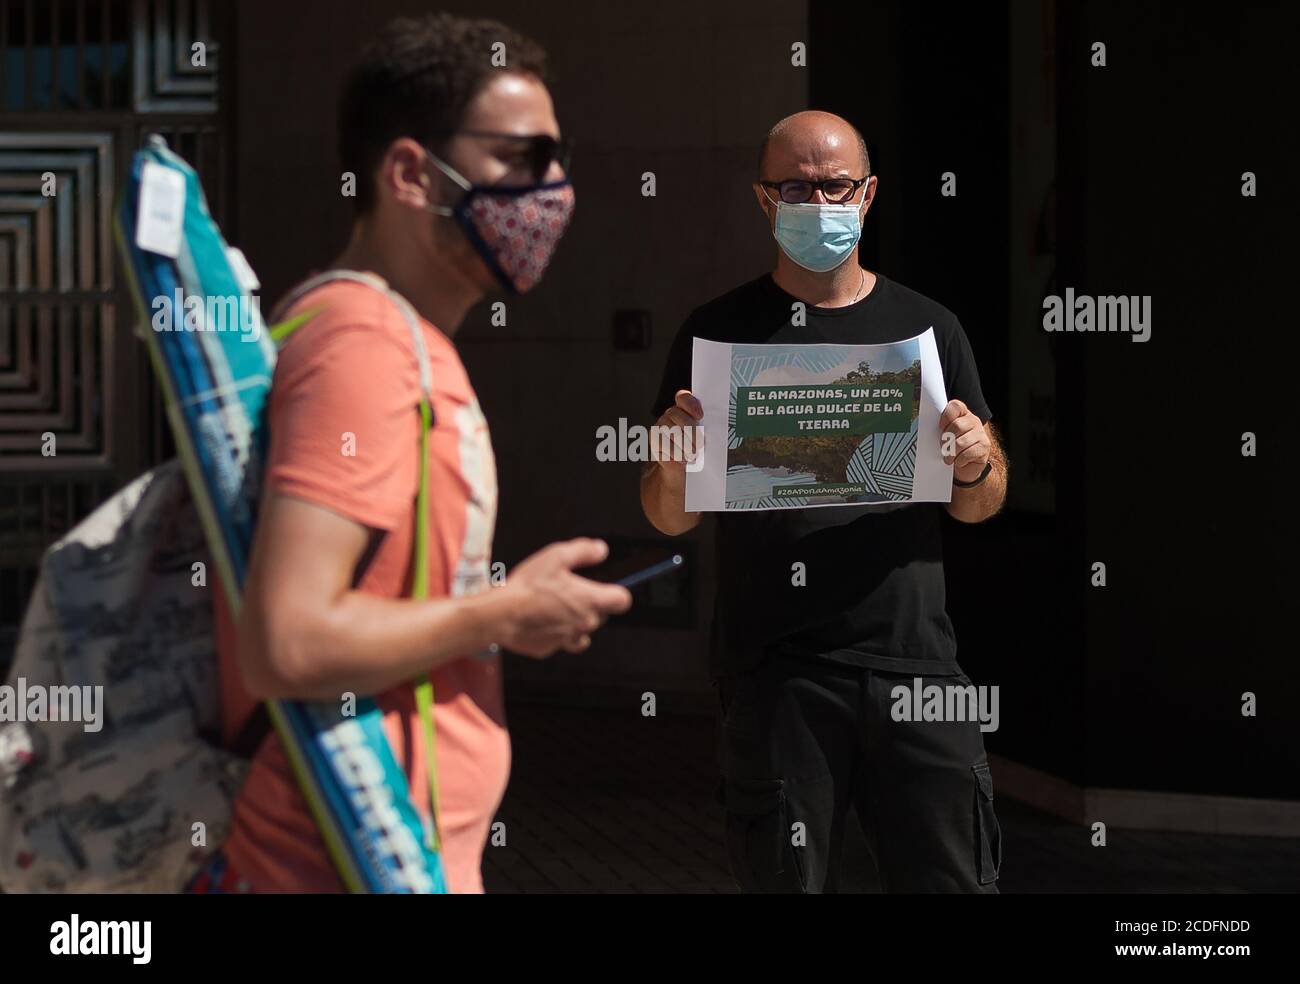 A protester wearing a face mask holds a placard expressing his opinion during the demonstration at La Malagueta square in Malaga.From 28 to 30 August members of 'Extinction Rebellion' movement have organized several actions to alert people about the situation of Amazonian Selva, considere the 'lungs of the world'; against commercial treaty between EU - MERCOSUR agreed for Brazilian president Jair Bolsonaro which would cause the deforestation of Amazonia and a negative impact in the climate while forest fires continue rising in the region. Stock Photo